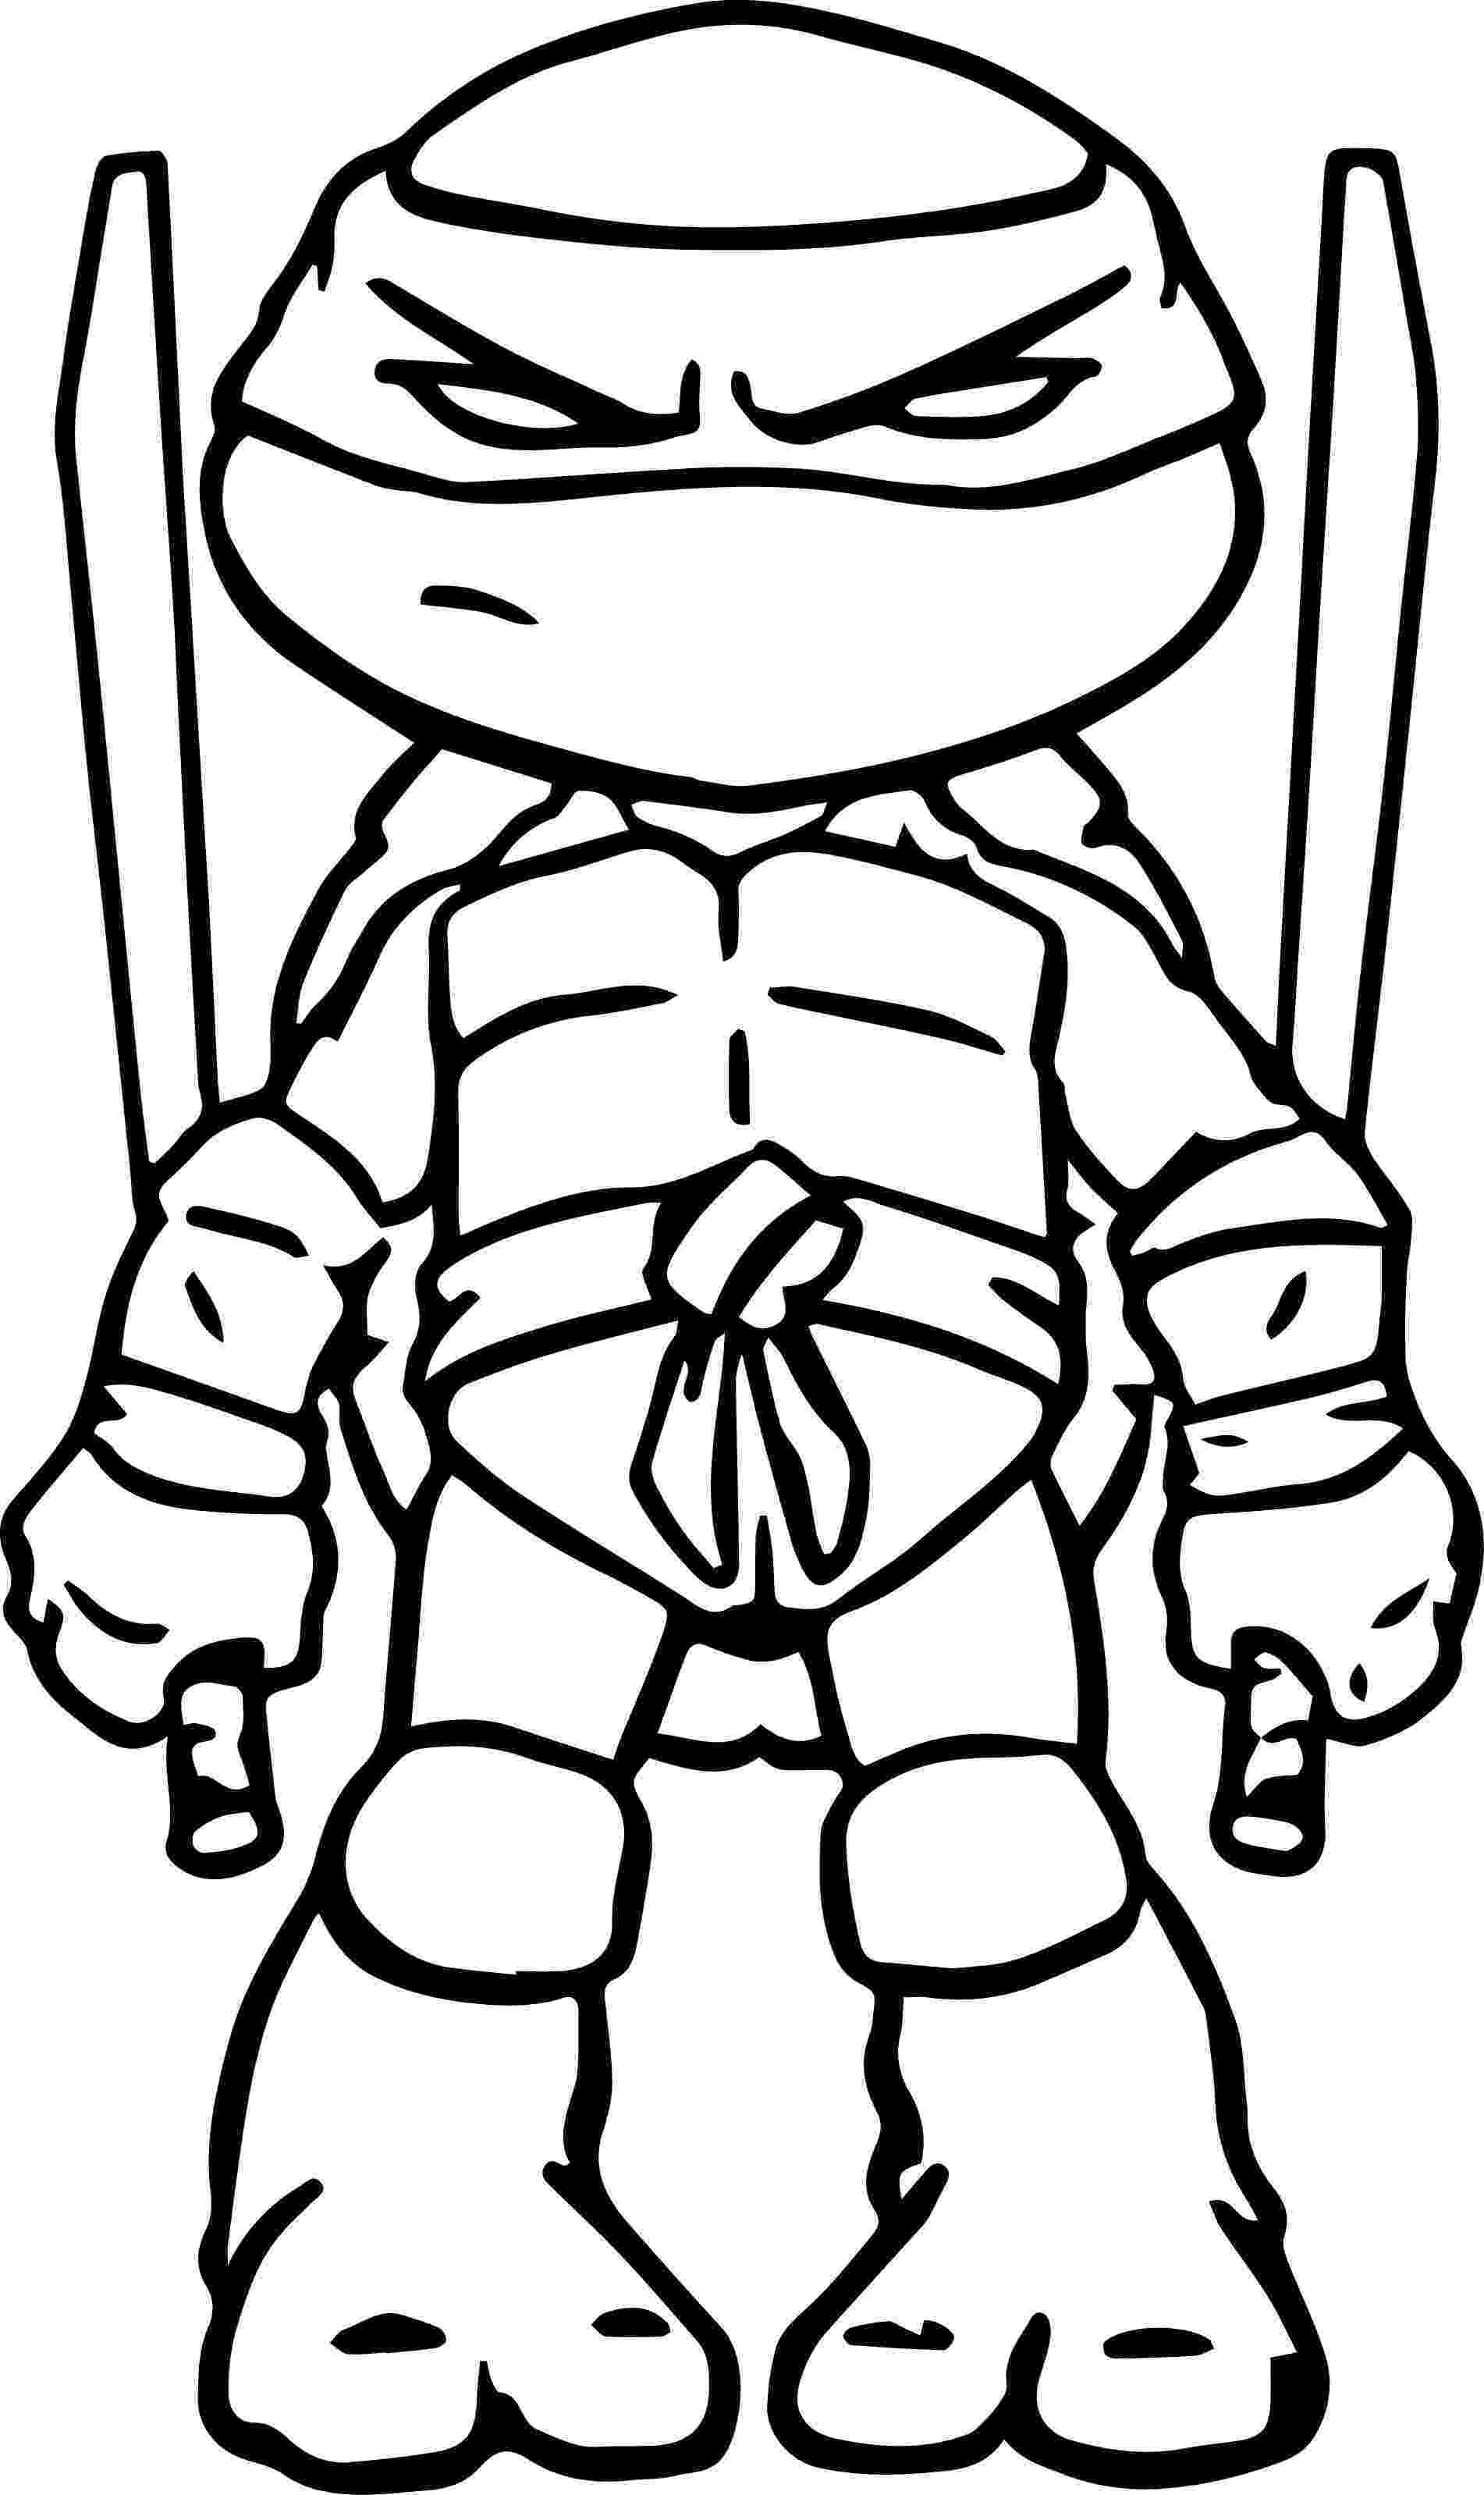 ninja turtles pictures to color ninja turtles art coloring page ninja turtle coloring turtles ninja color pictures to 